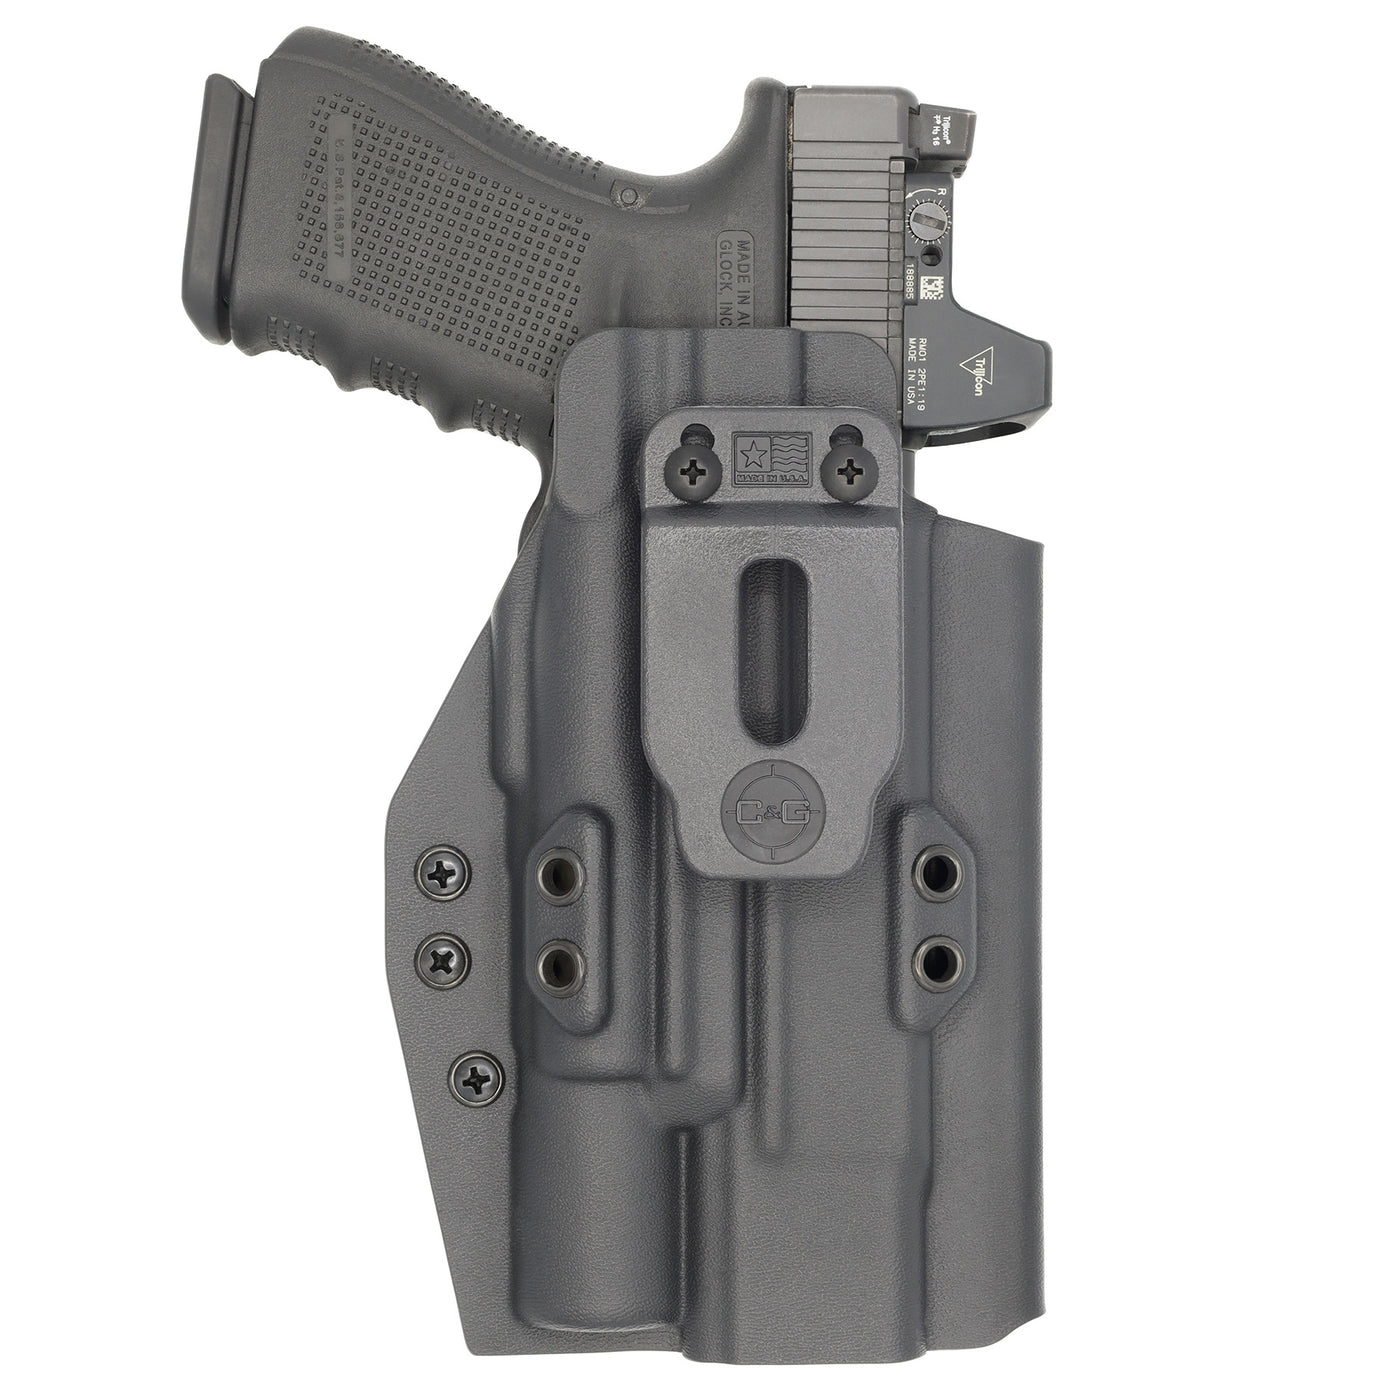 C&G Holsters custom IWB Tactical Shadow Systems Surefire X300 holstered